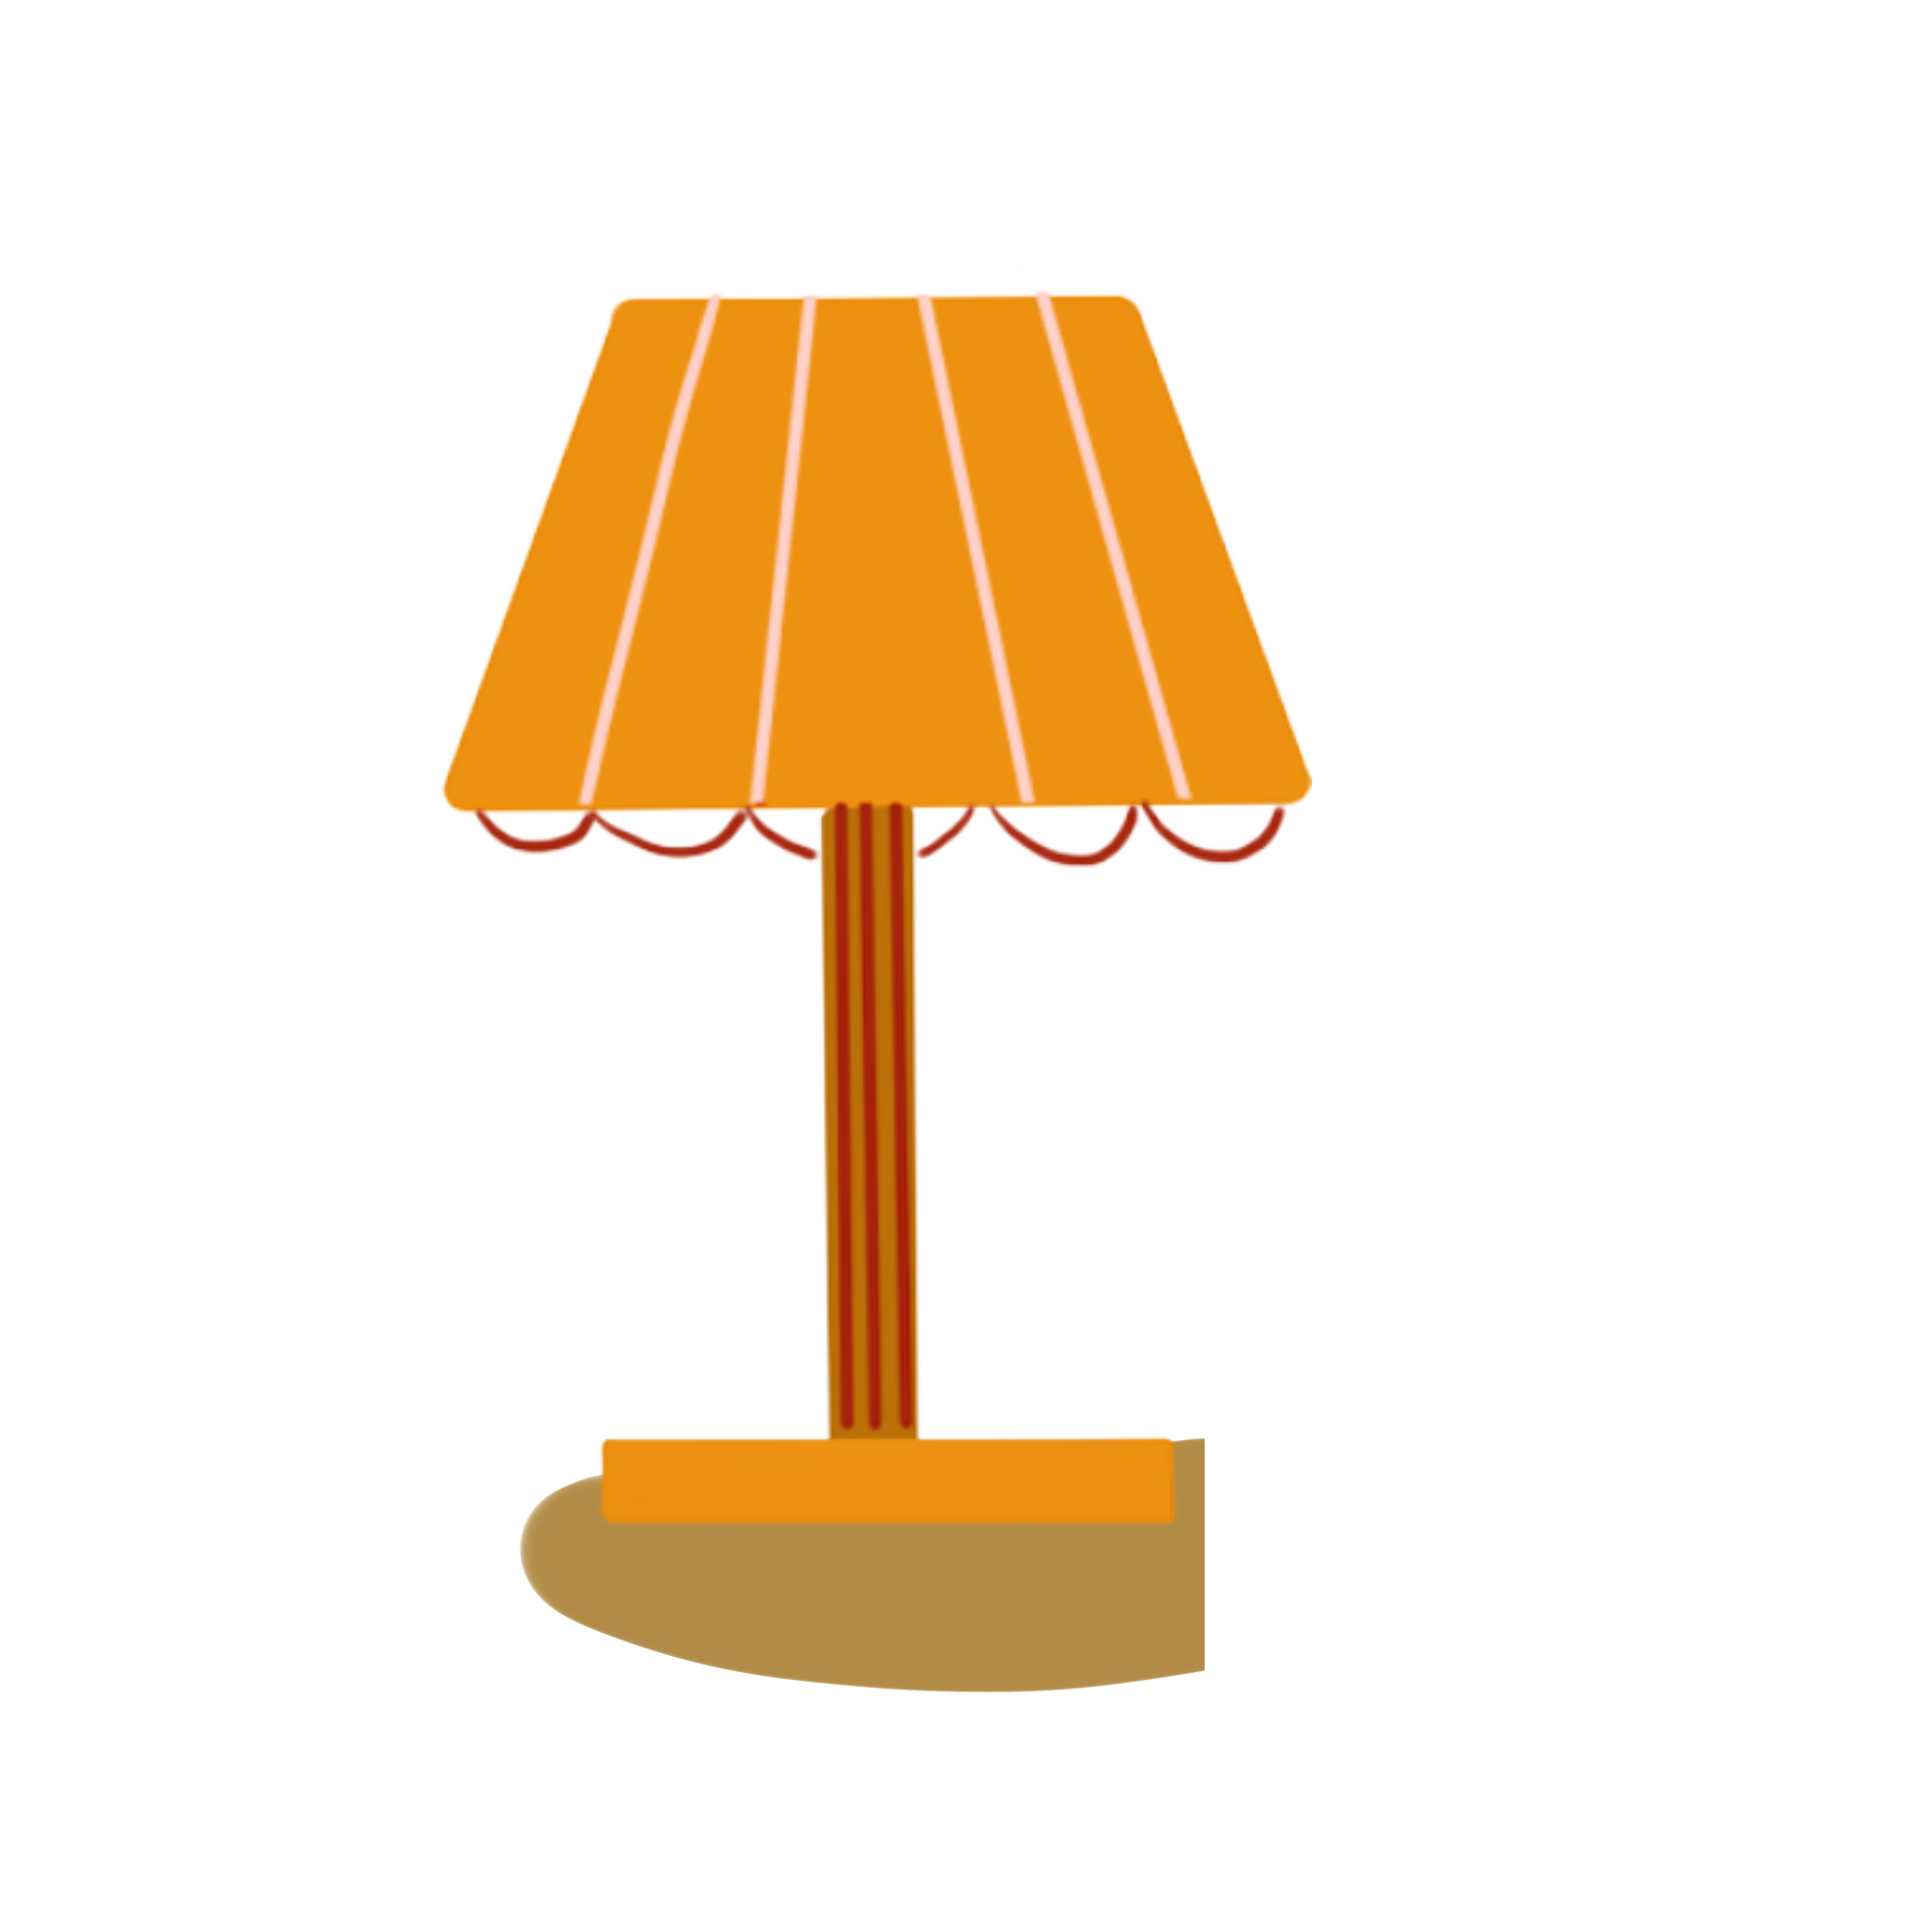 How to draw Lamp.Step by step(easy draw) - YouTube